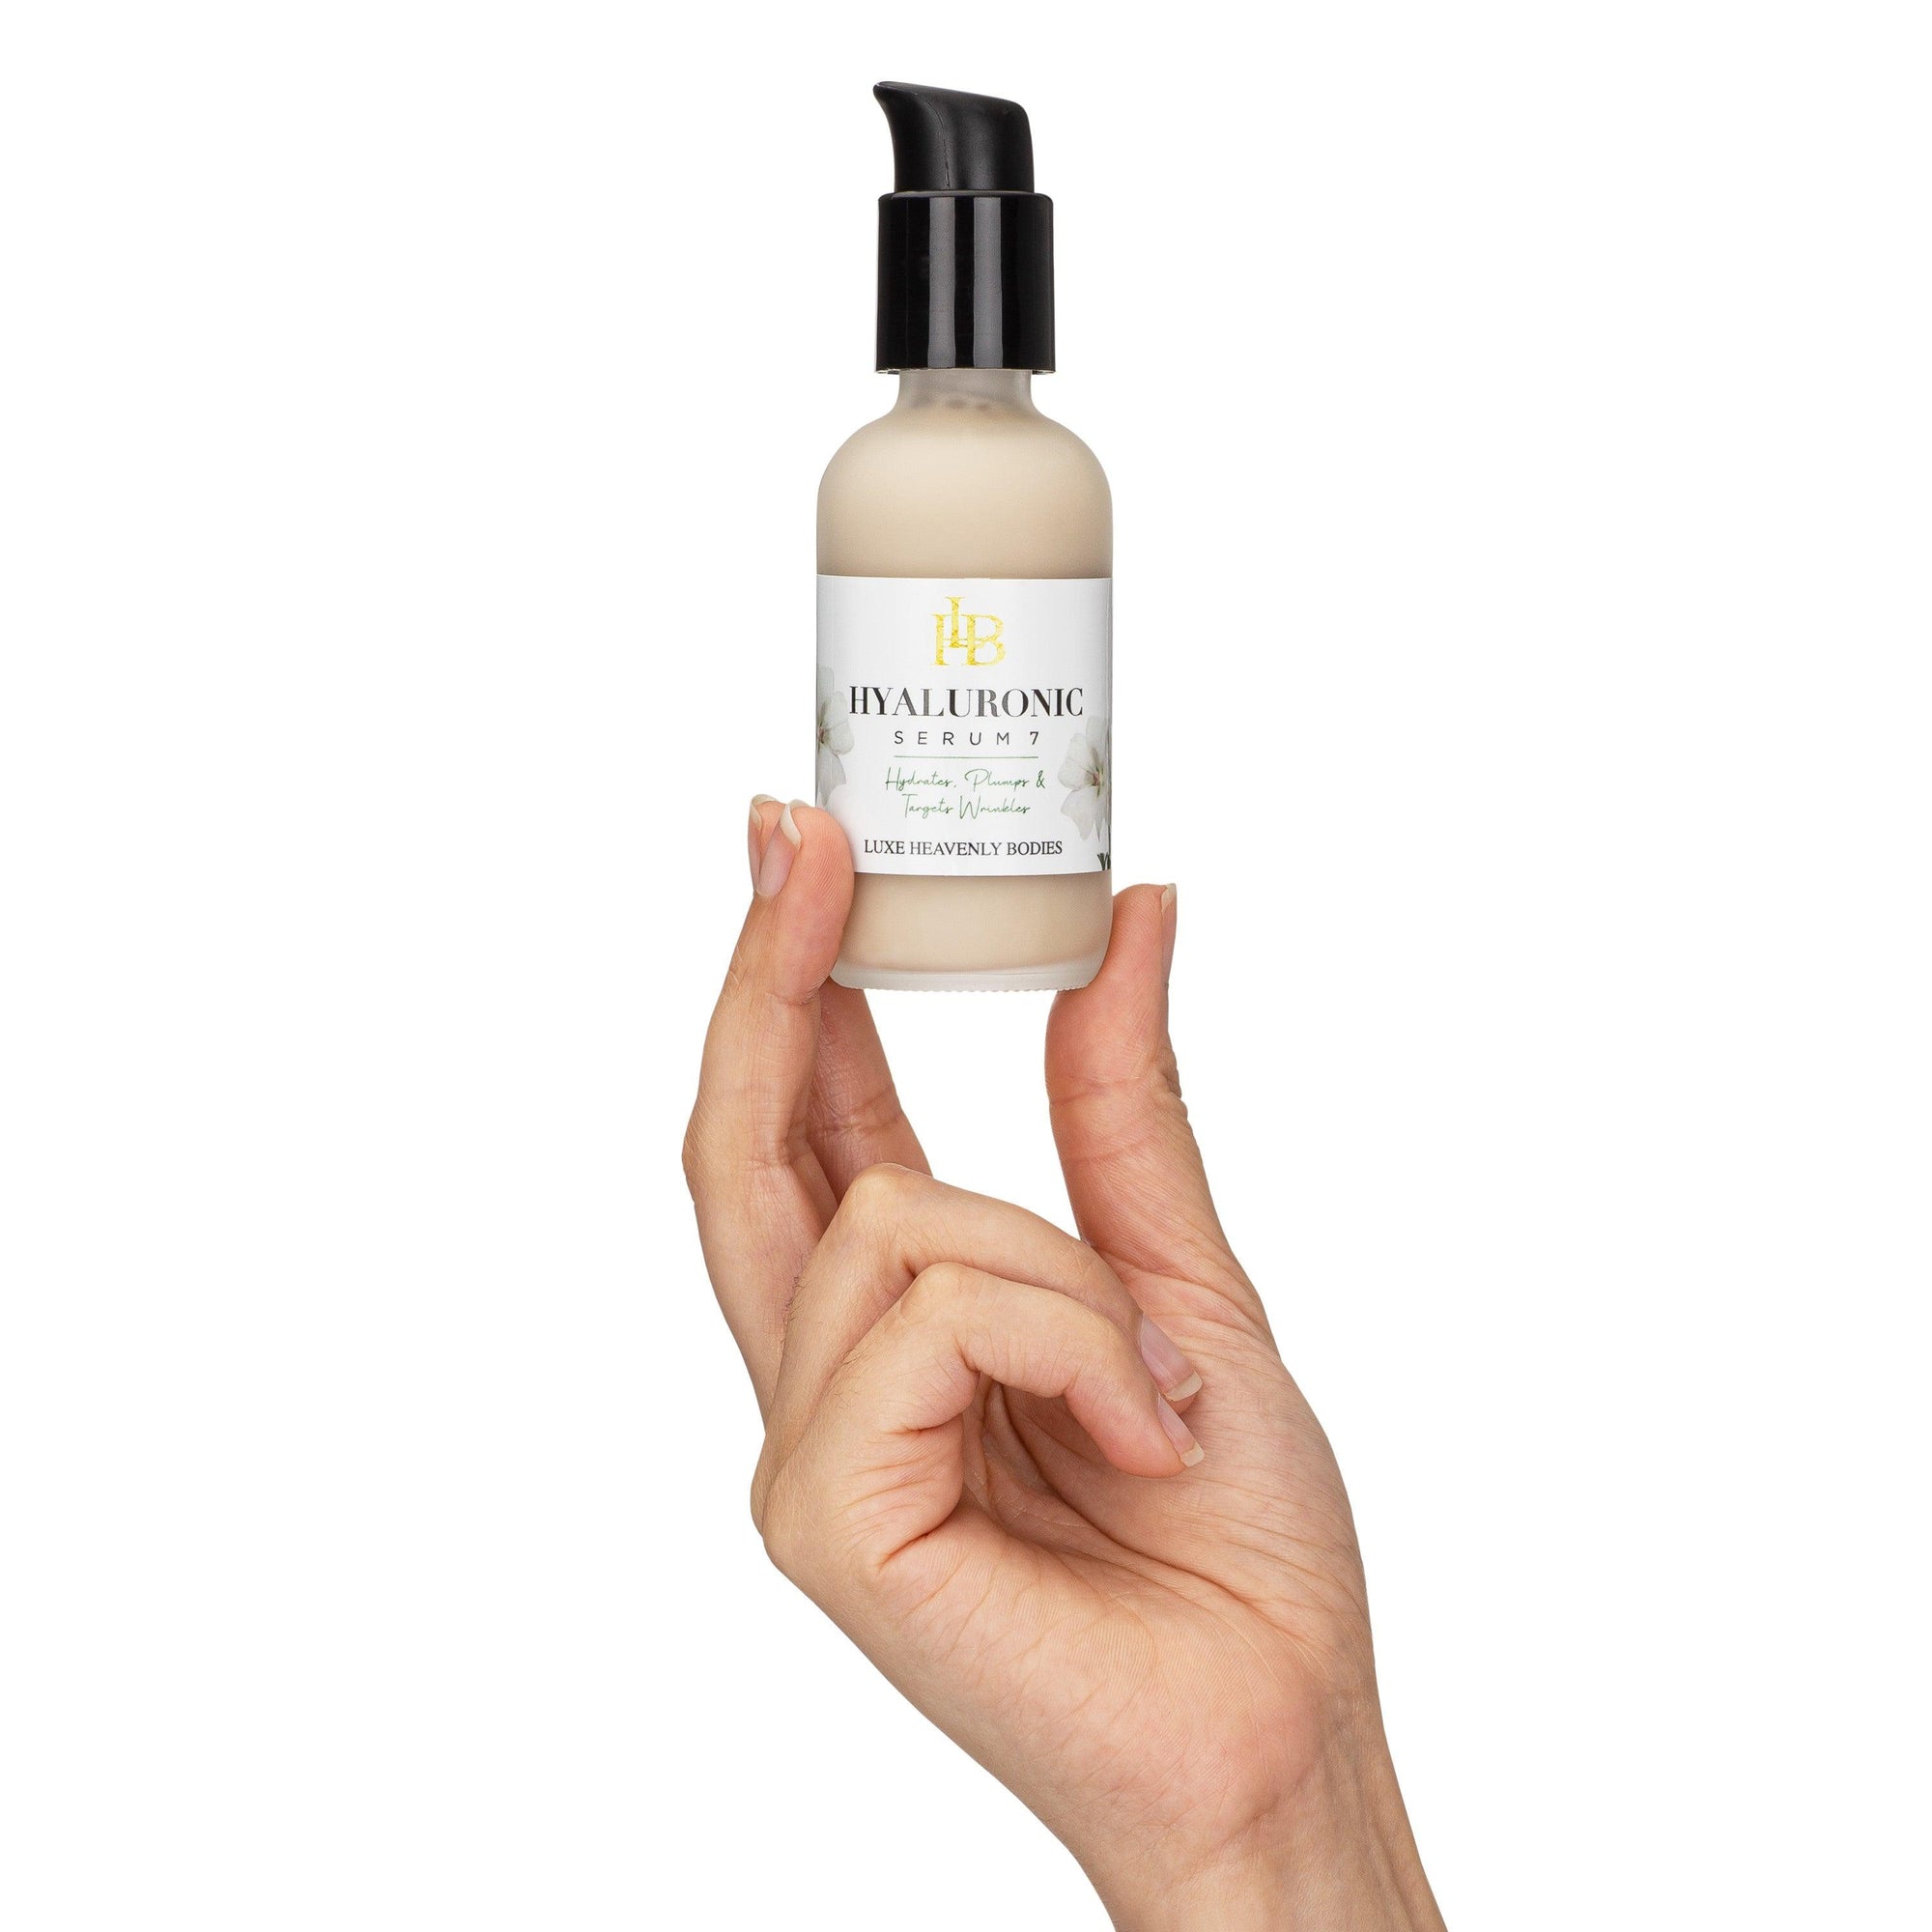 Hyaluronic Serum 7 - LUXE Heavenly Bodies